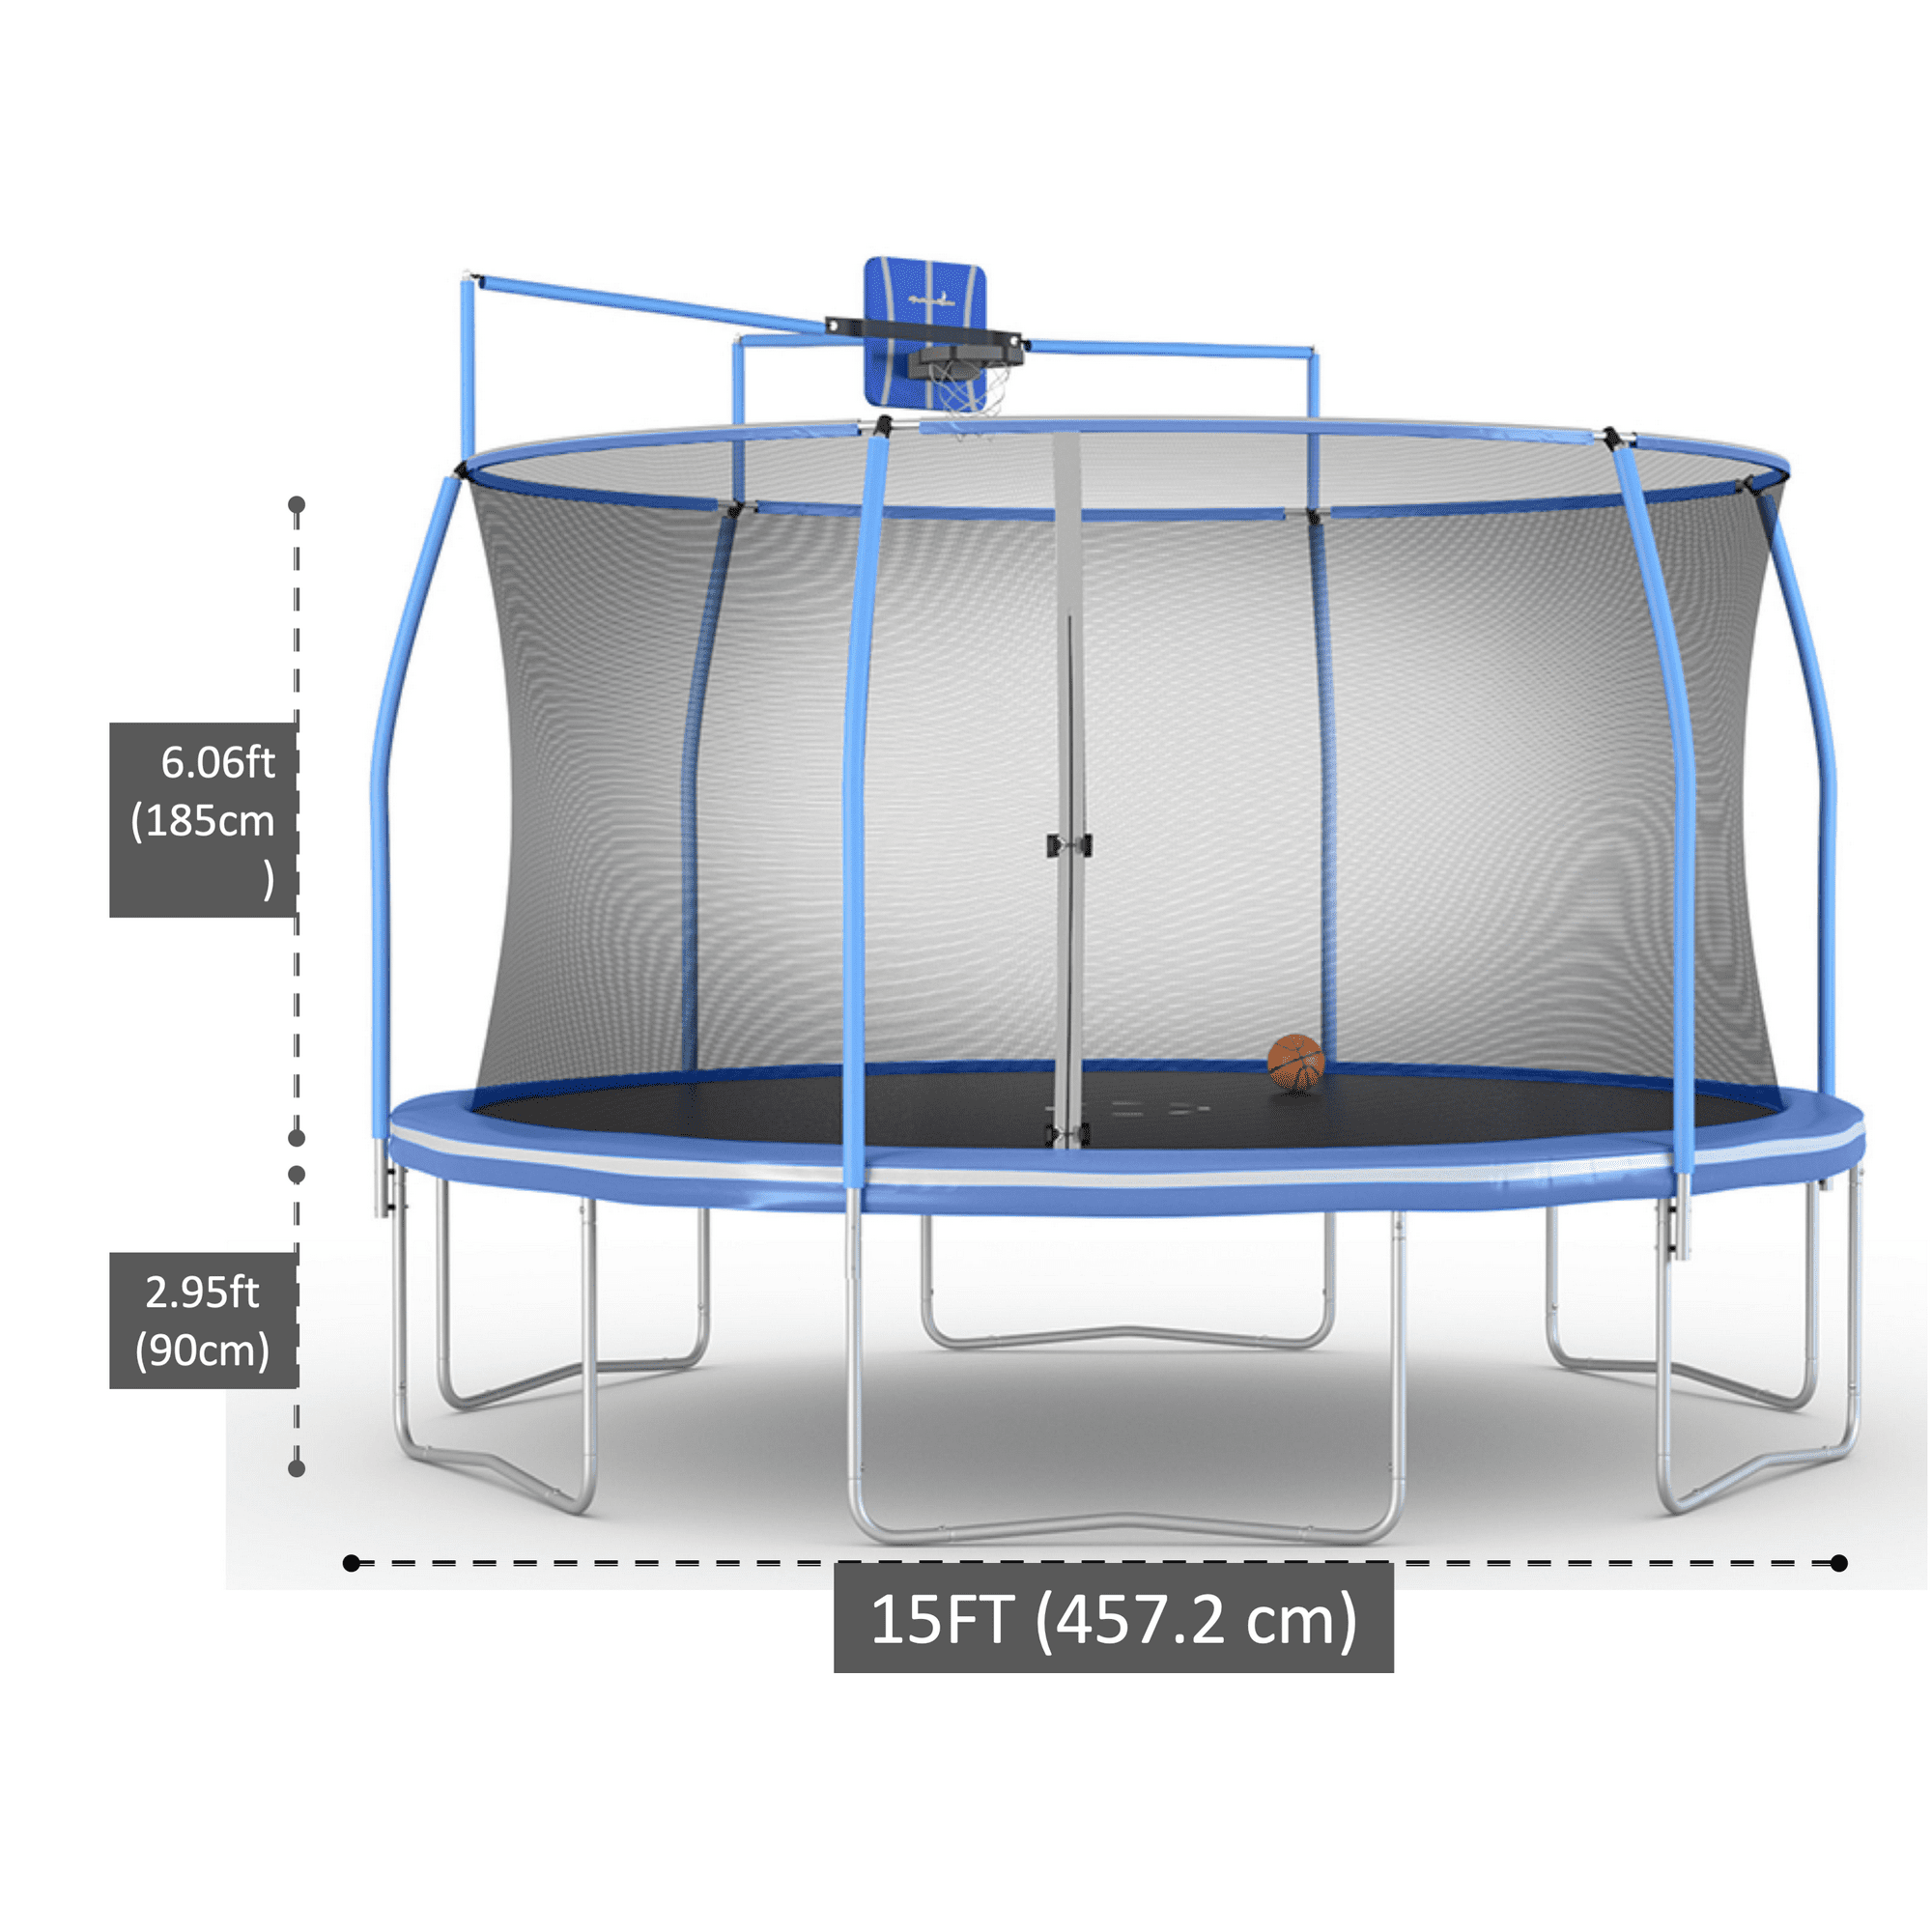 Bounce Pro 15' Trampoline, Basketball Hoop, Safety Enclosure, Blue